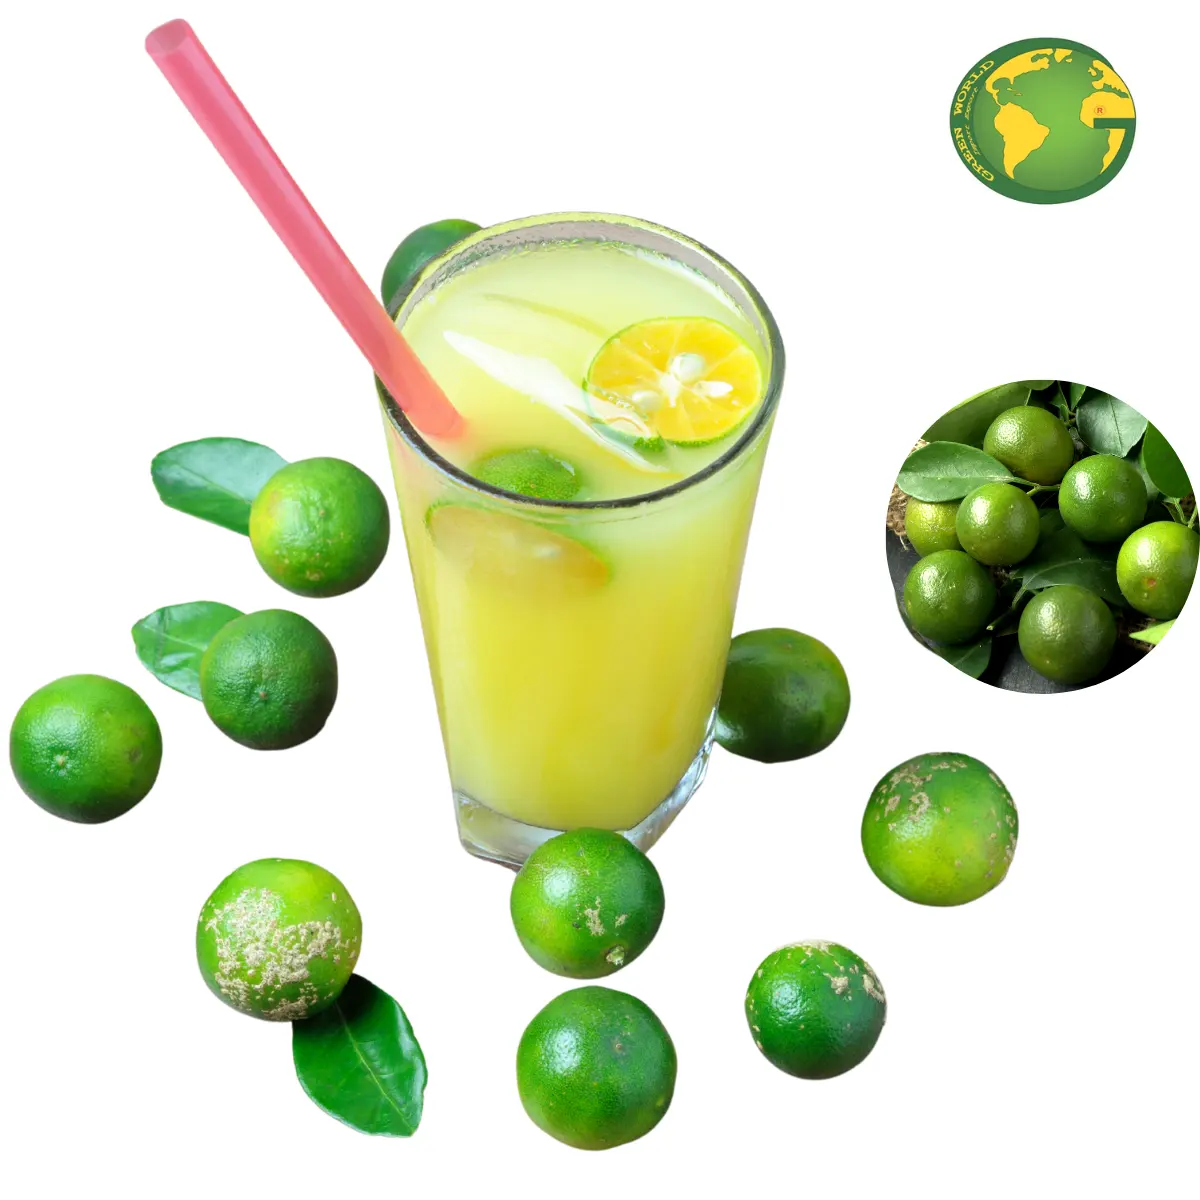 FROZEN CALAMANSI PUREE FROM VIETNAM WITH HIGH QUALITY - BEST CHOICES CALAMANSI JUICE WITH HIGH QUALITY AND RICH VITAMIN FOR YOU